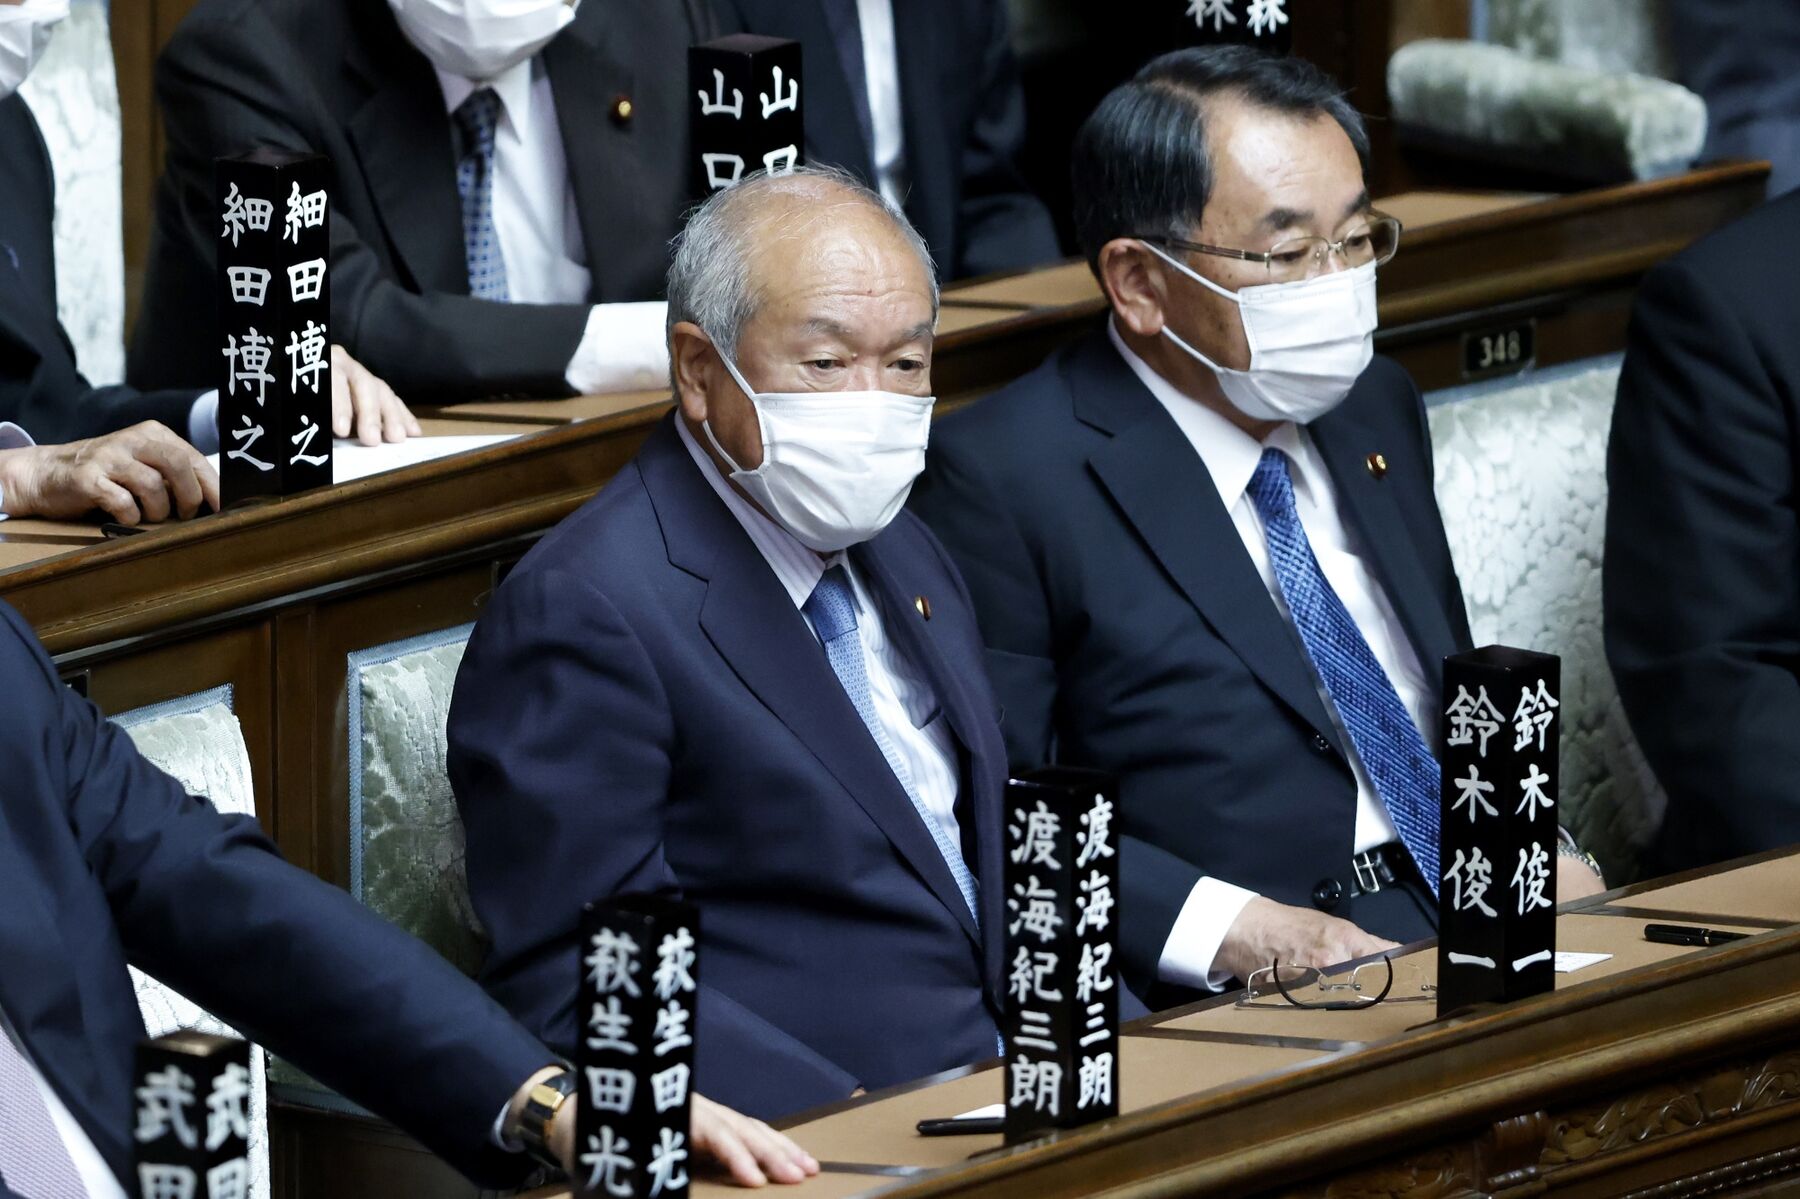 Shunichi Suzuki, Japan's former Olympics and Paralympics minister, left, attends an extraordinary session at the lower house of parliament in Tokyo, Japan, on Monday, Oct. 4, 2021. Fumio Kishida was appointed prime minister by parliament Monday, and is set to reveal a new cabinet lineup as he seeks to revive support for his ruling party ahead of a general election that could likely come this month.